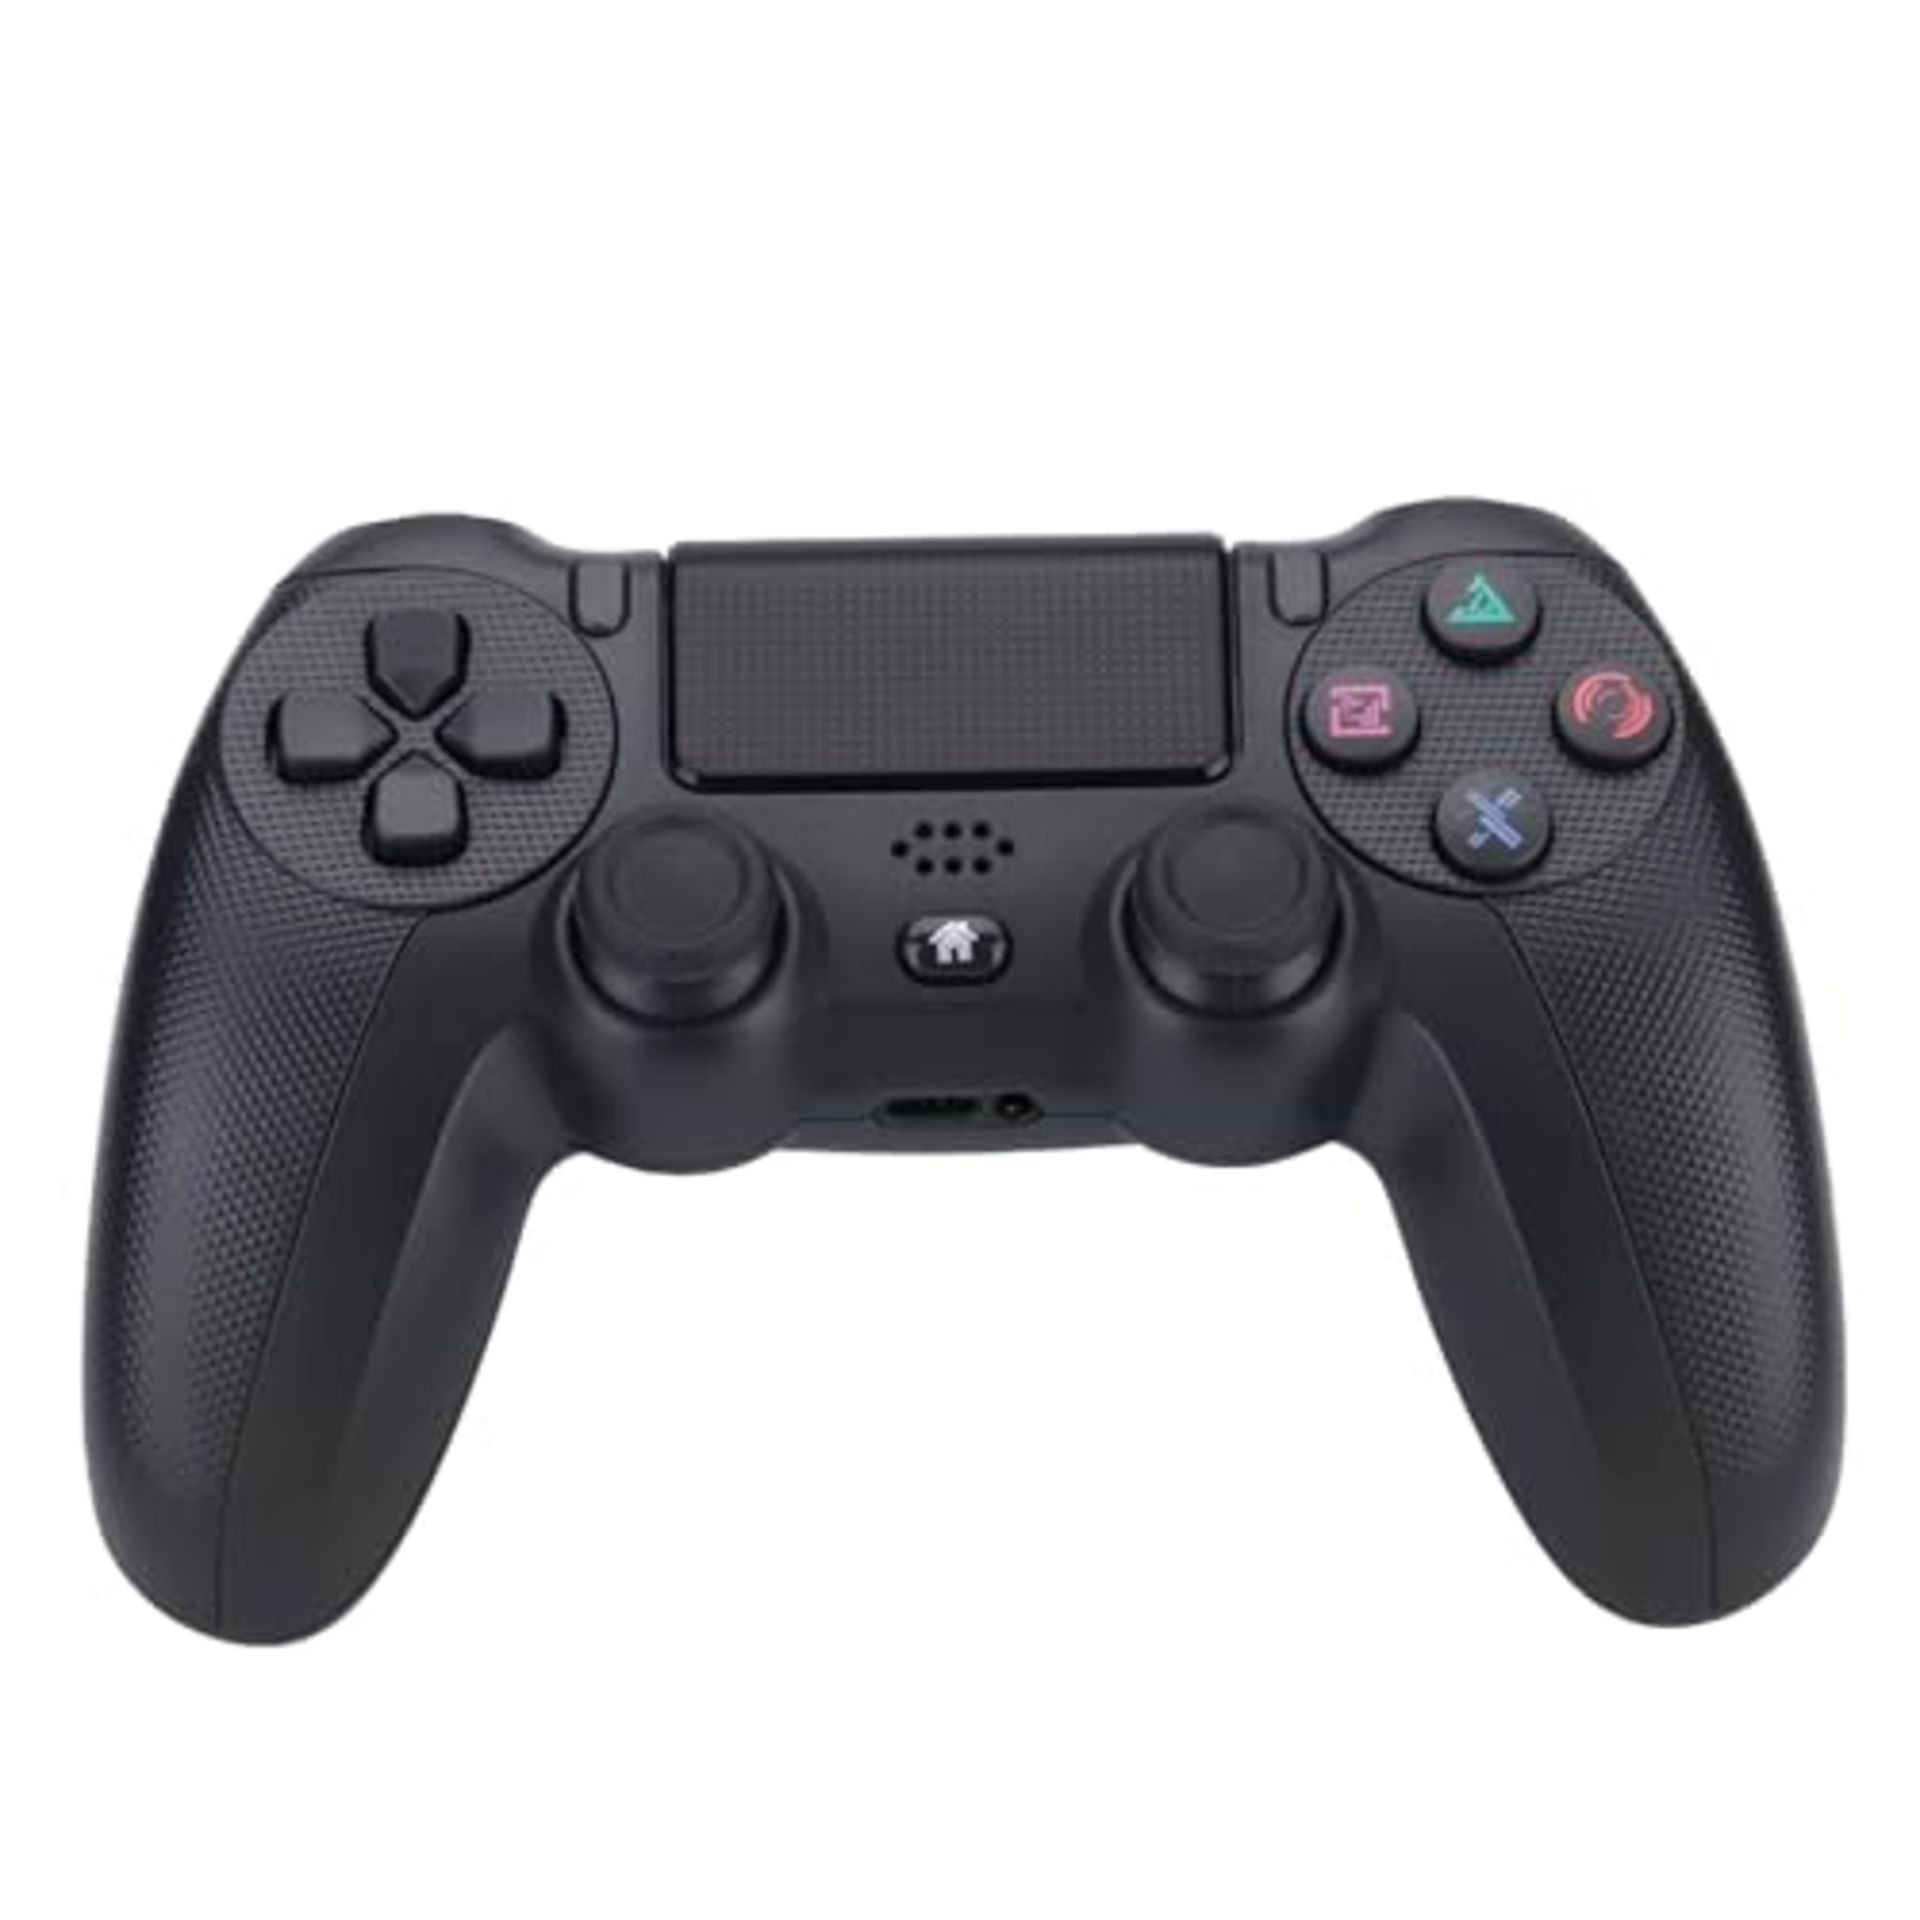 NK Wireless Controller PS4 / PS3 / PC/Mobile - Wireless controller with Vibration, 6-a